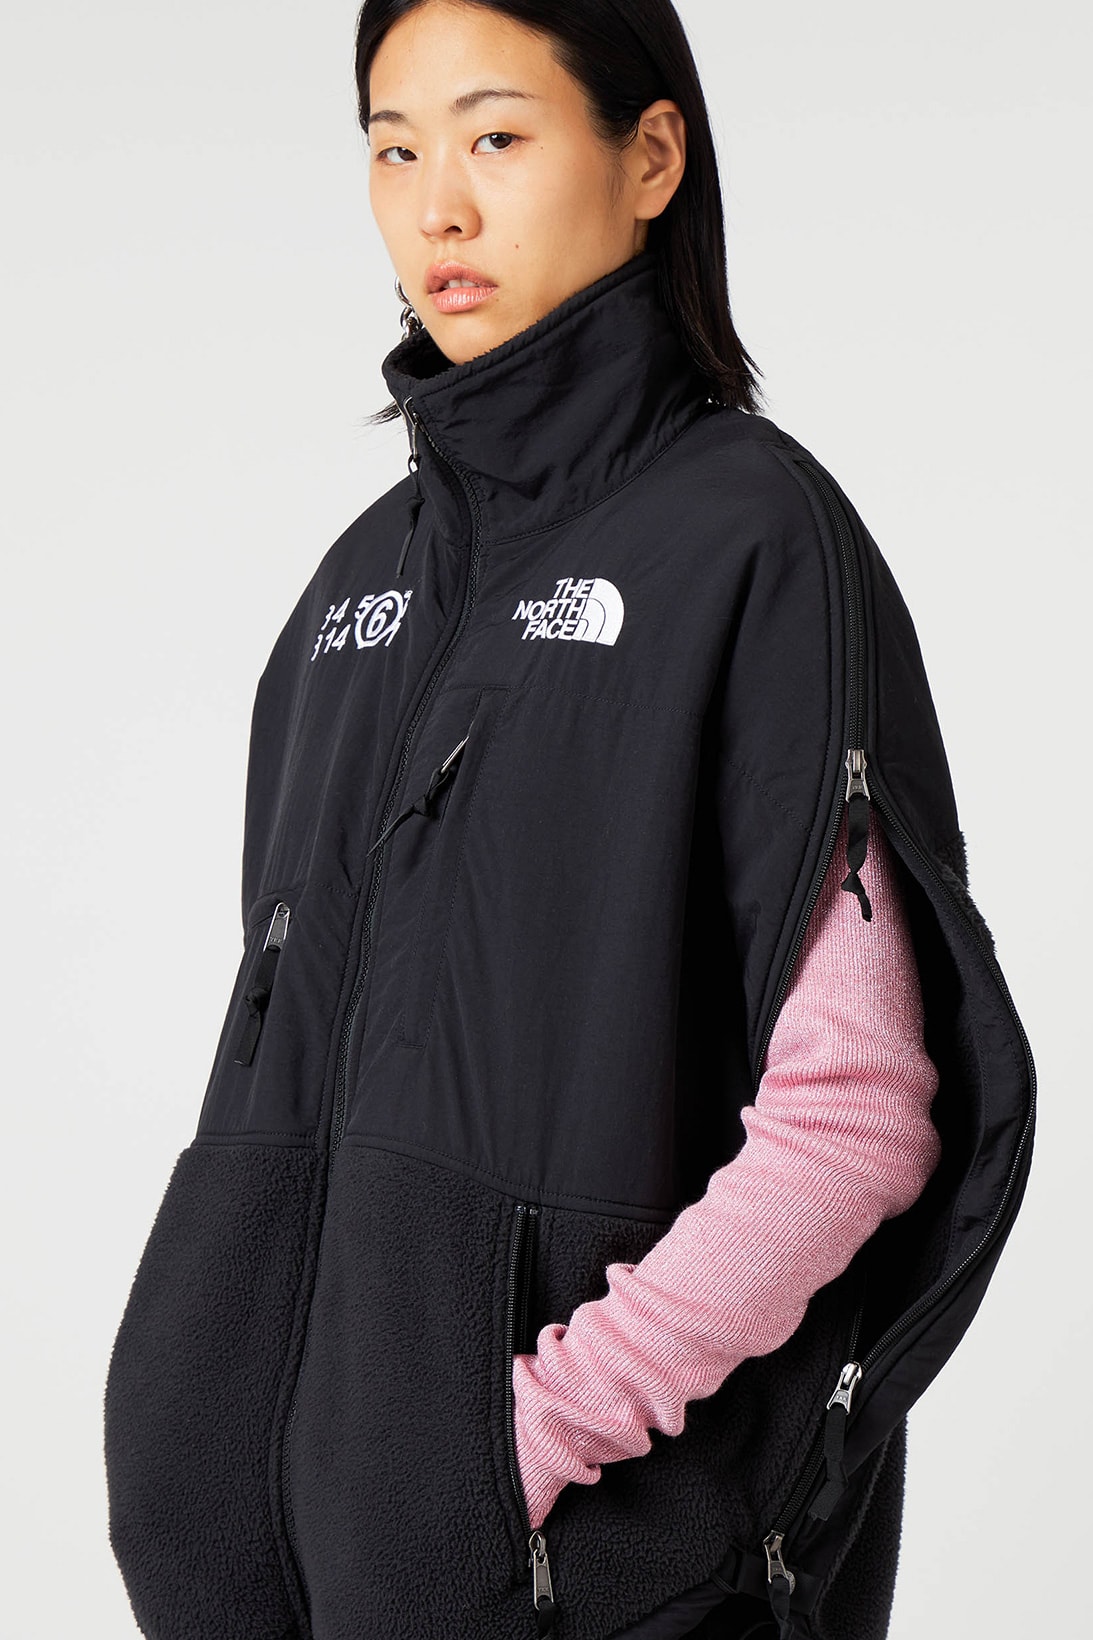 mm6 maison margiela the north face tnf collaboration closer look fall winter outerwear release price where to buy